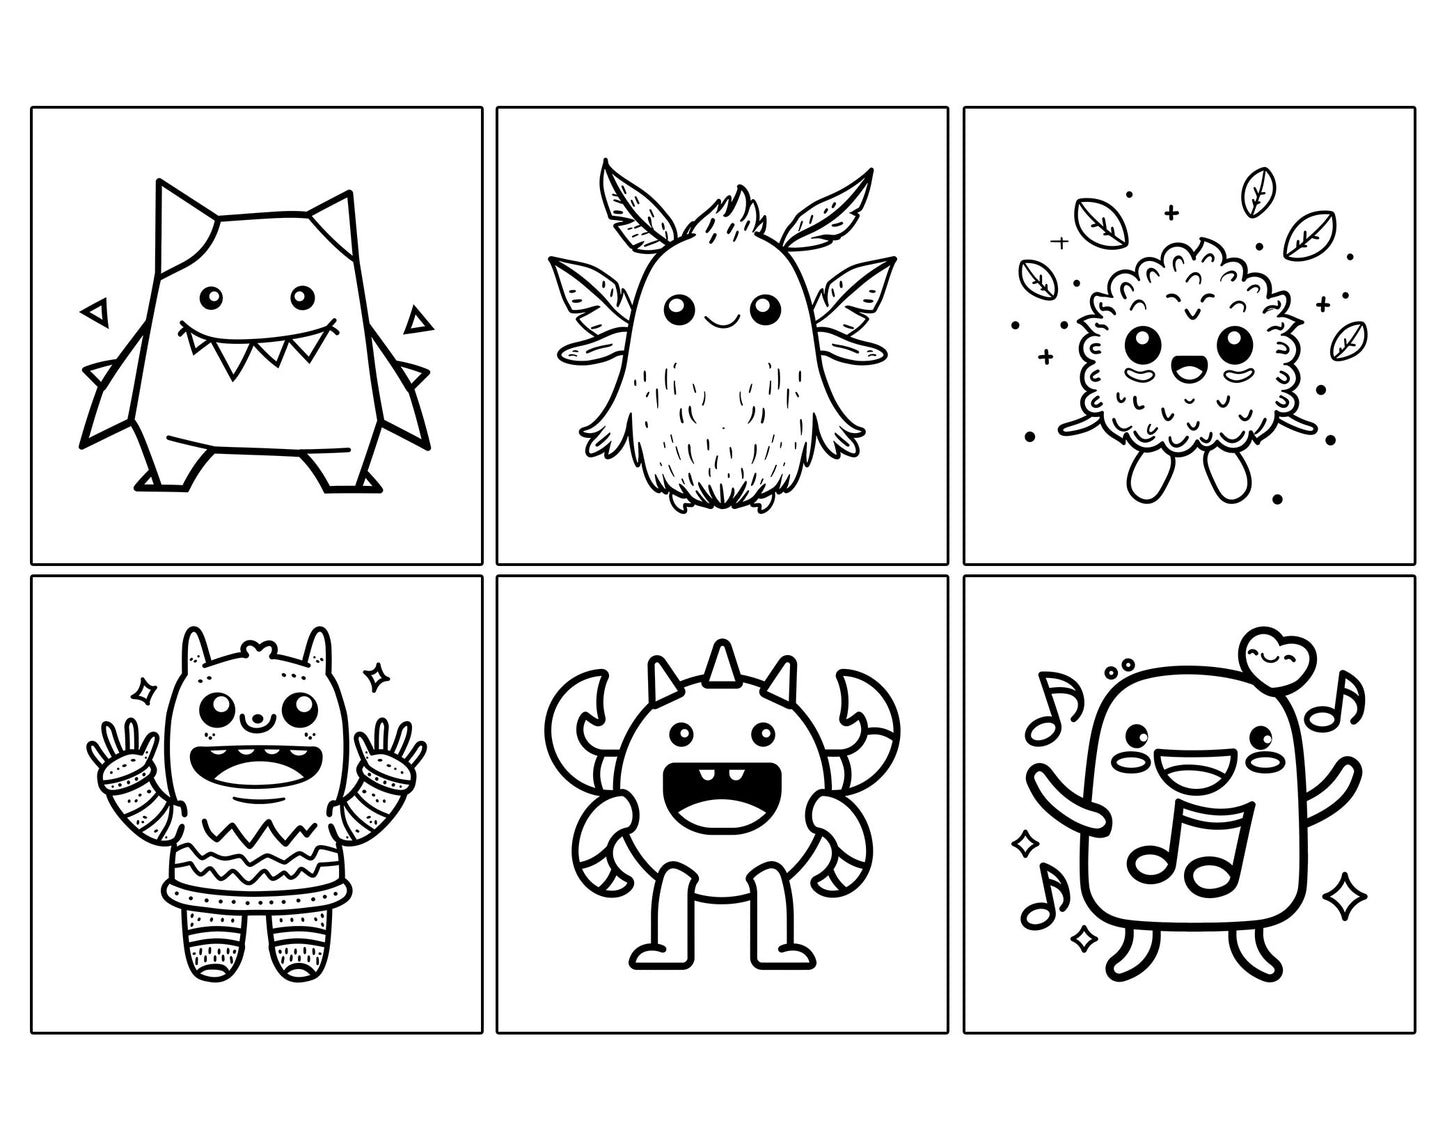 60 Kawaii Monsters Cute & Simple Coloring Pages - Instant Download - Printable